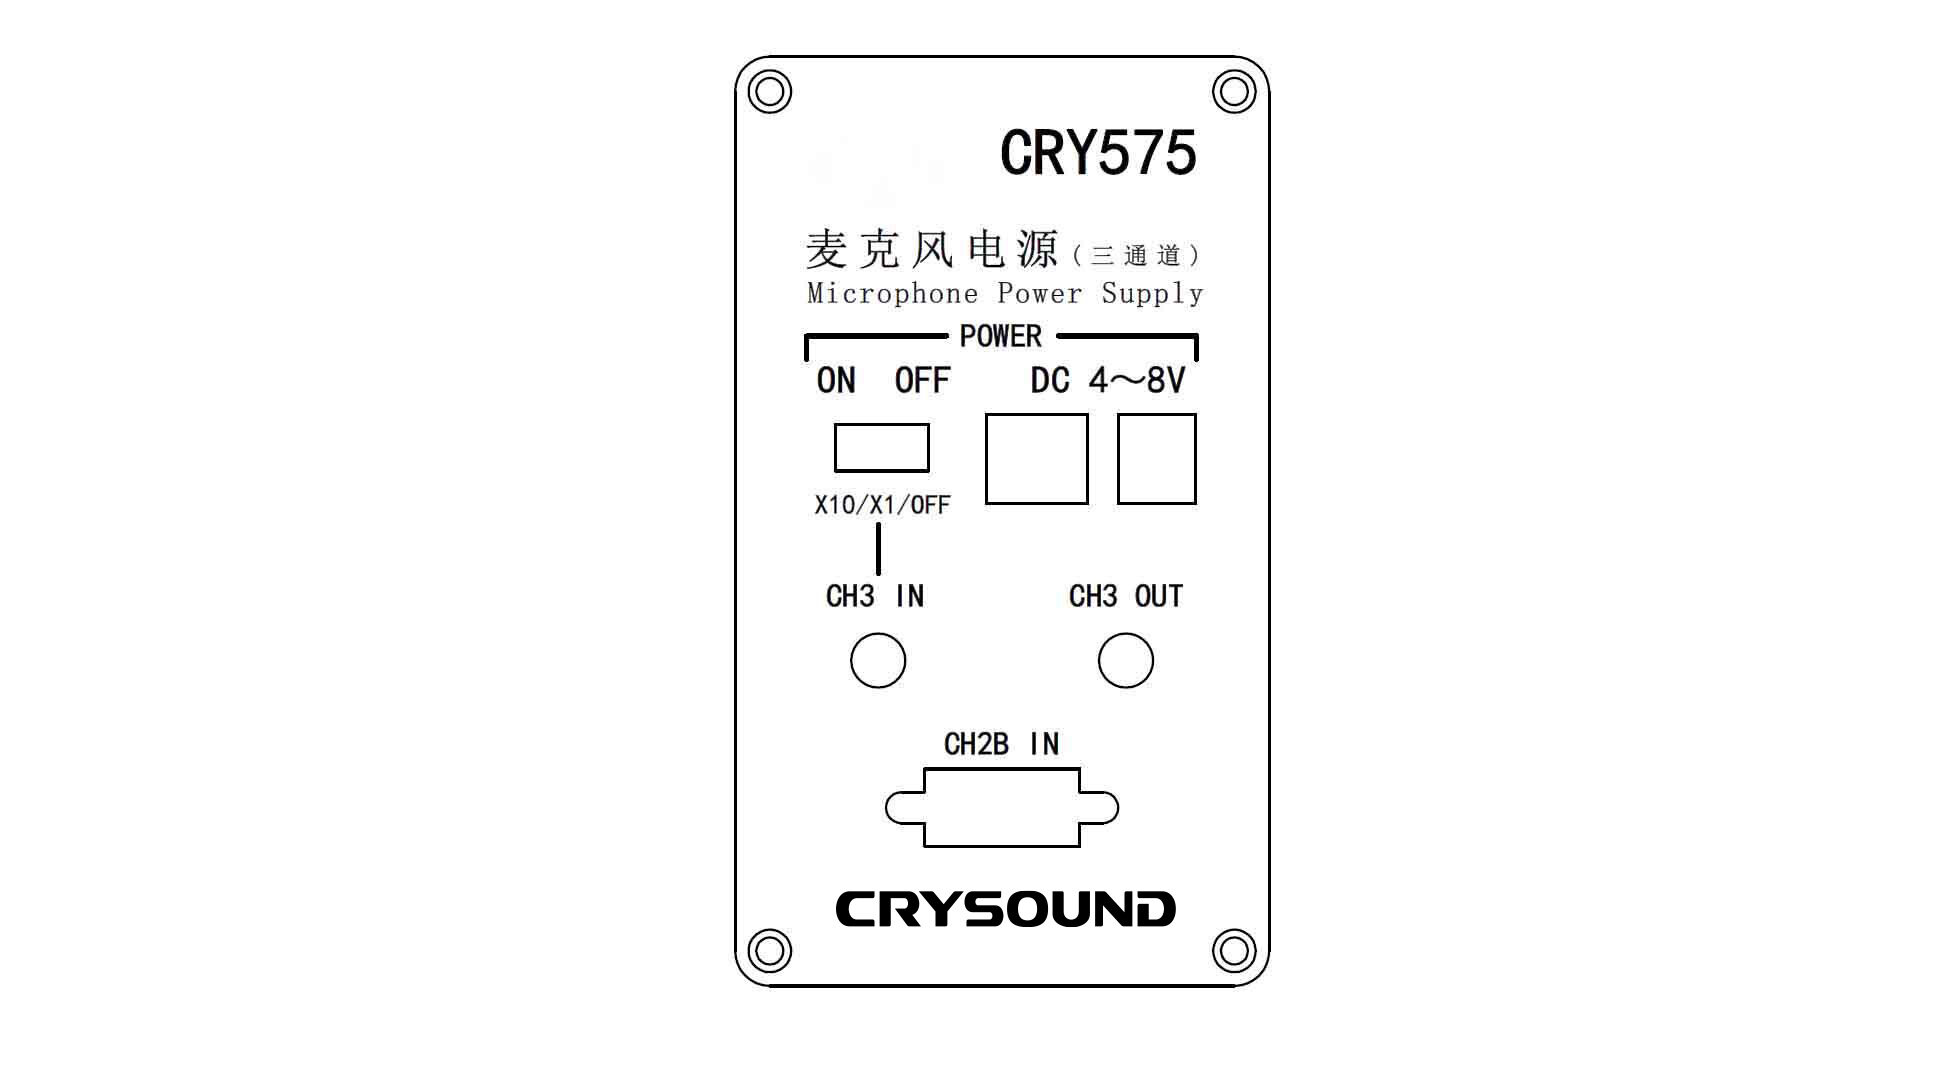 CRY575 Rear Panel